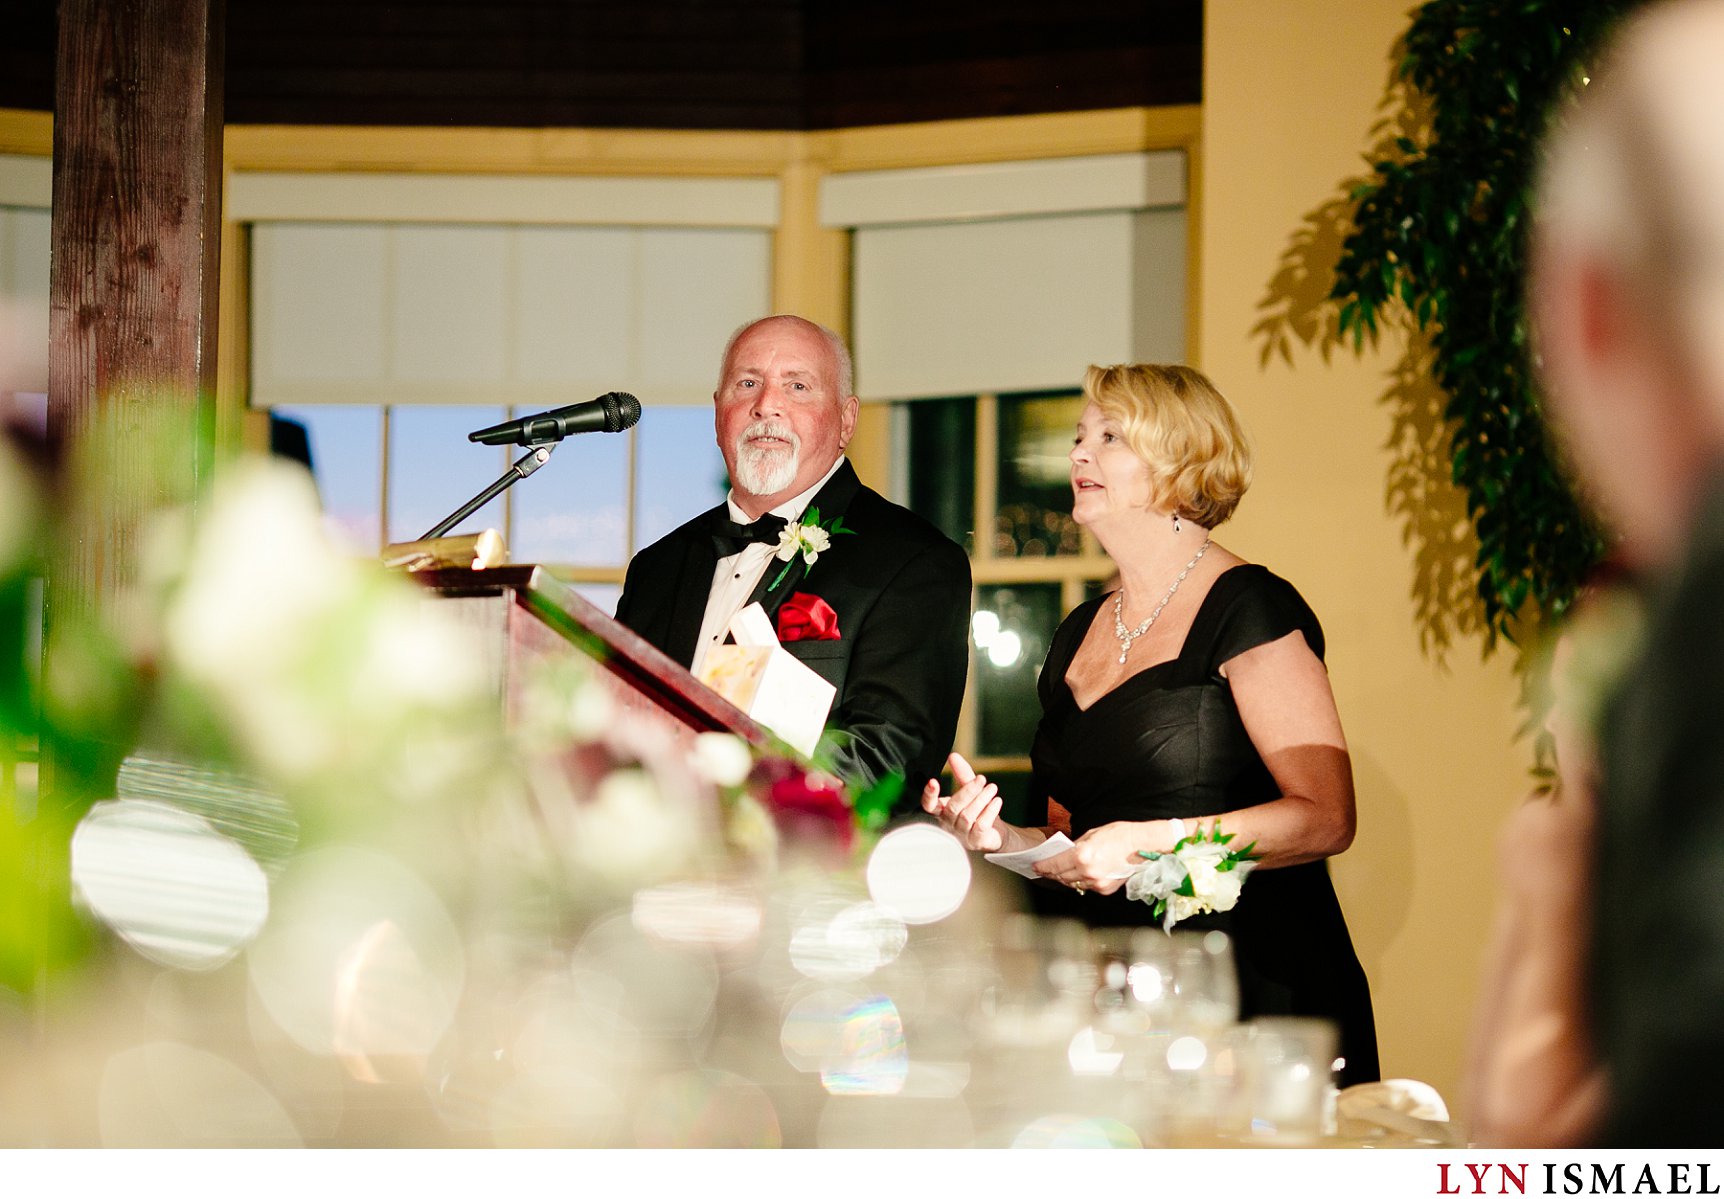 the groom's parents give a speech.